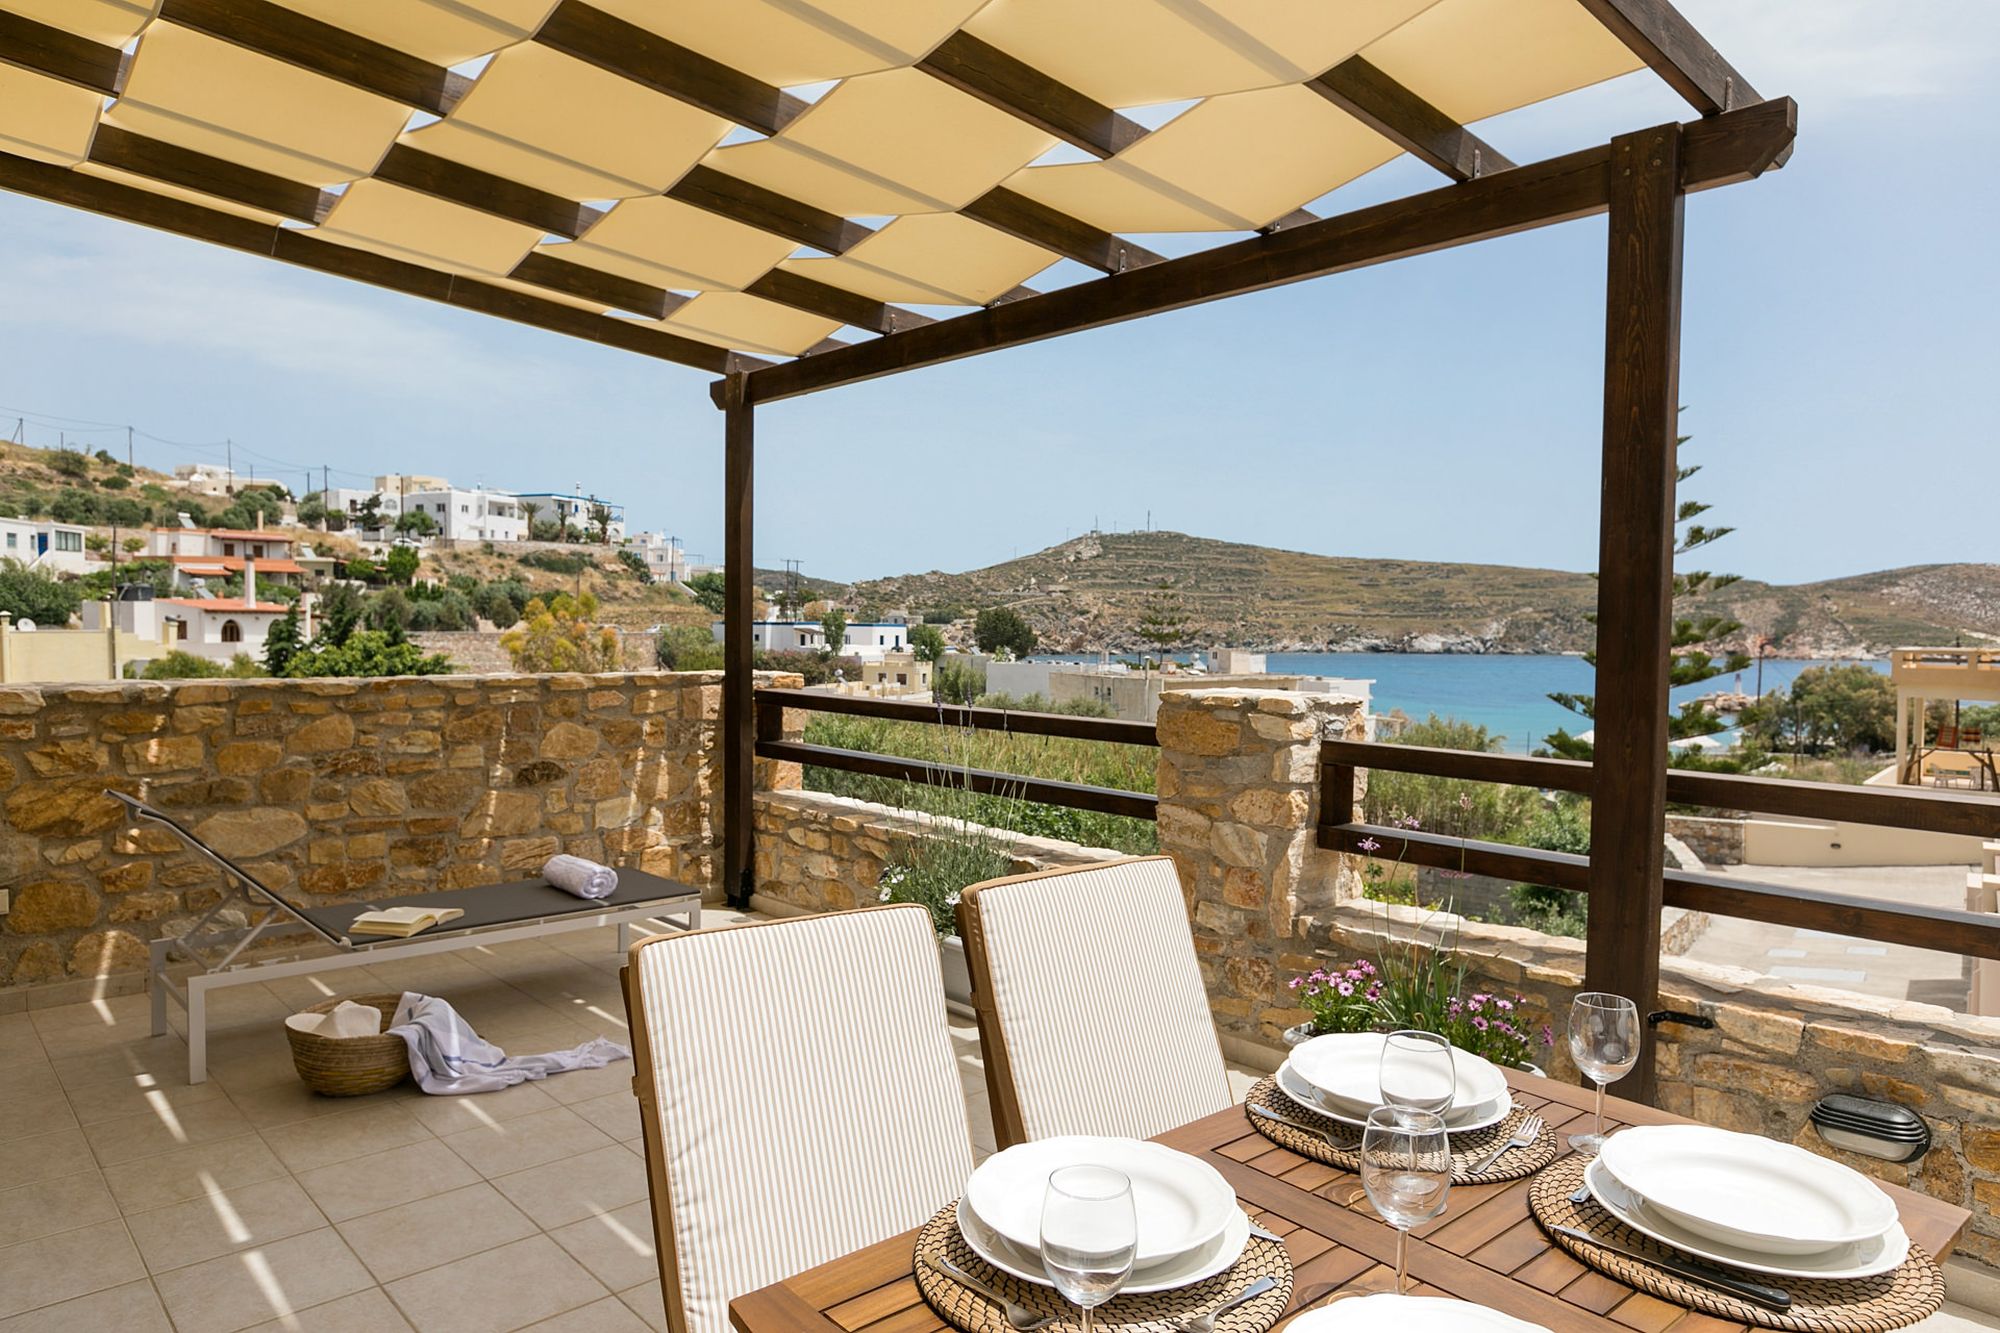 A sea view stone-built veranda with pergola, furnished with a wooden dining table and one sunbed.